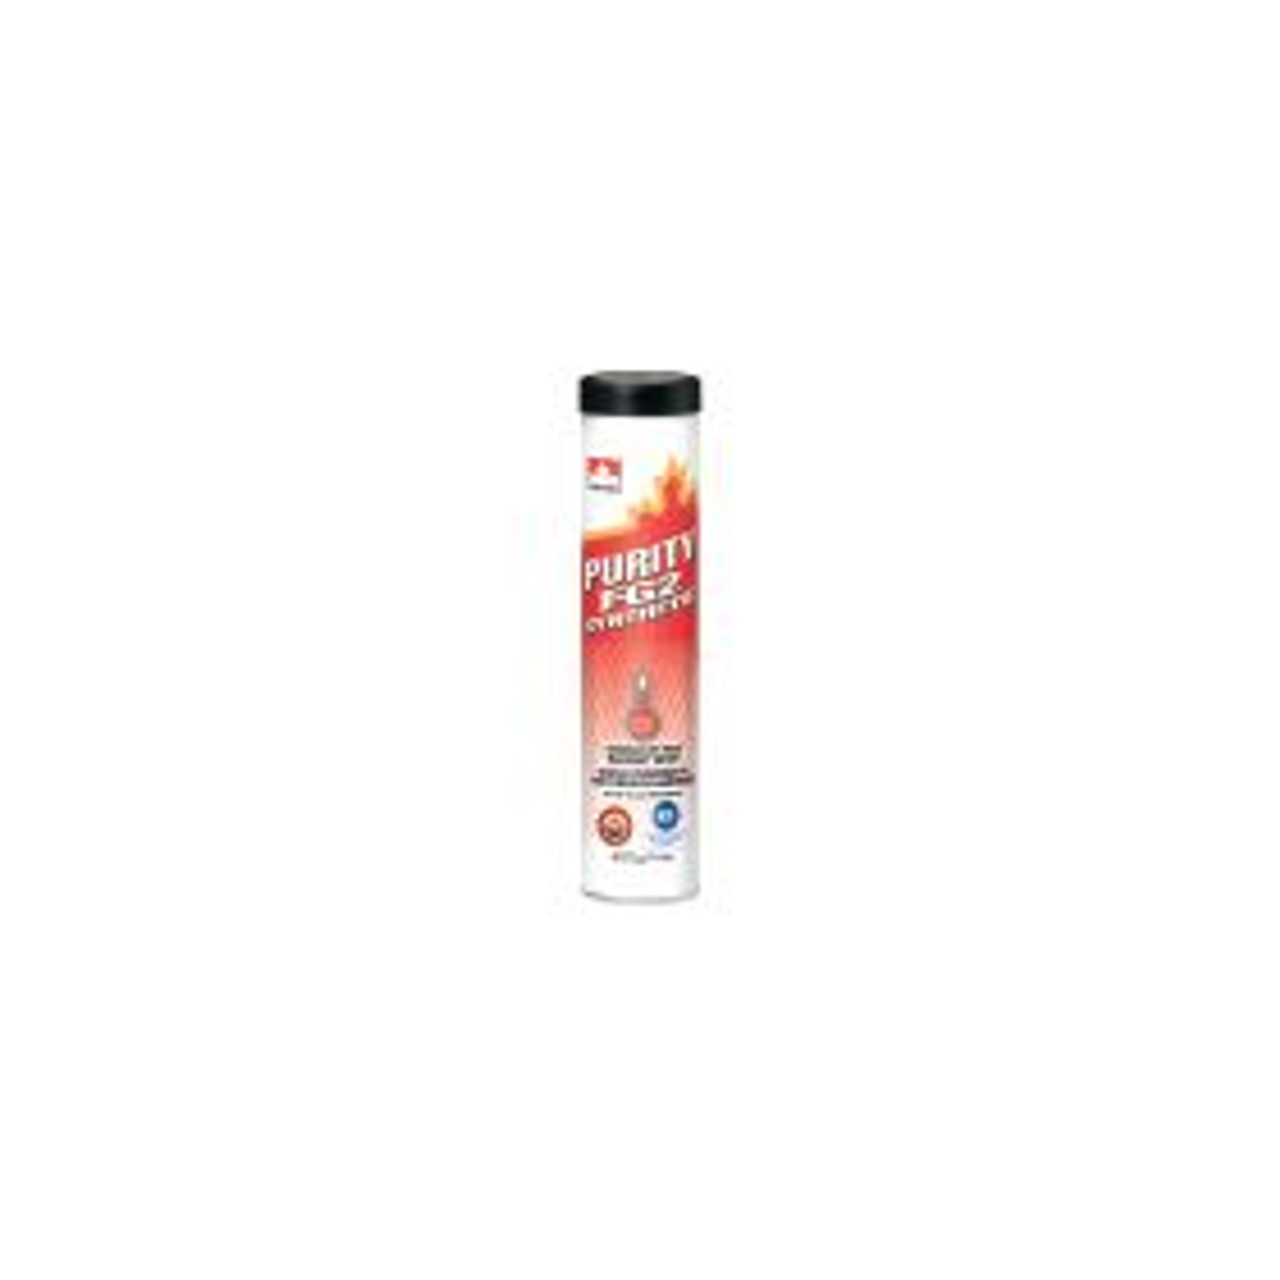 Petro Canada Purity FG SynFX Food Machine Grease Heavy 220 - 3-10/14oz tubes